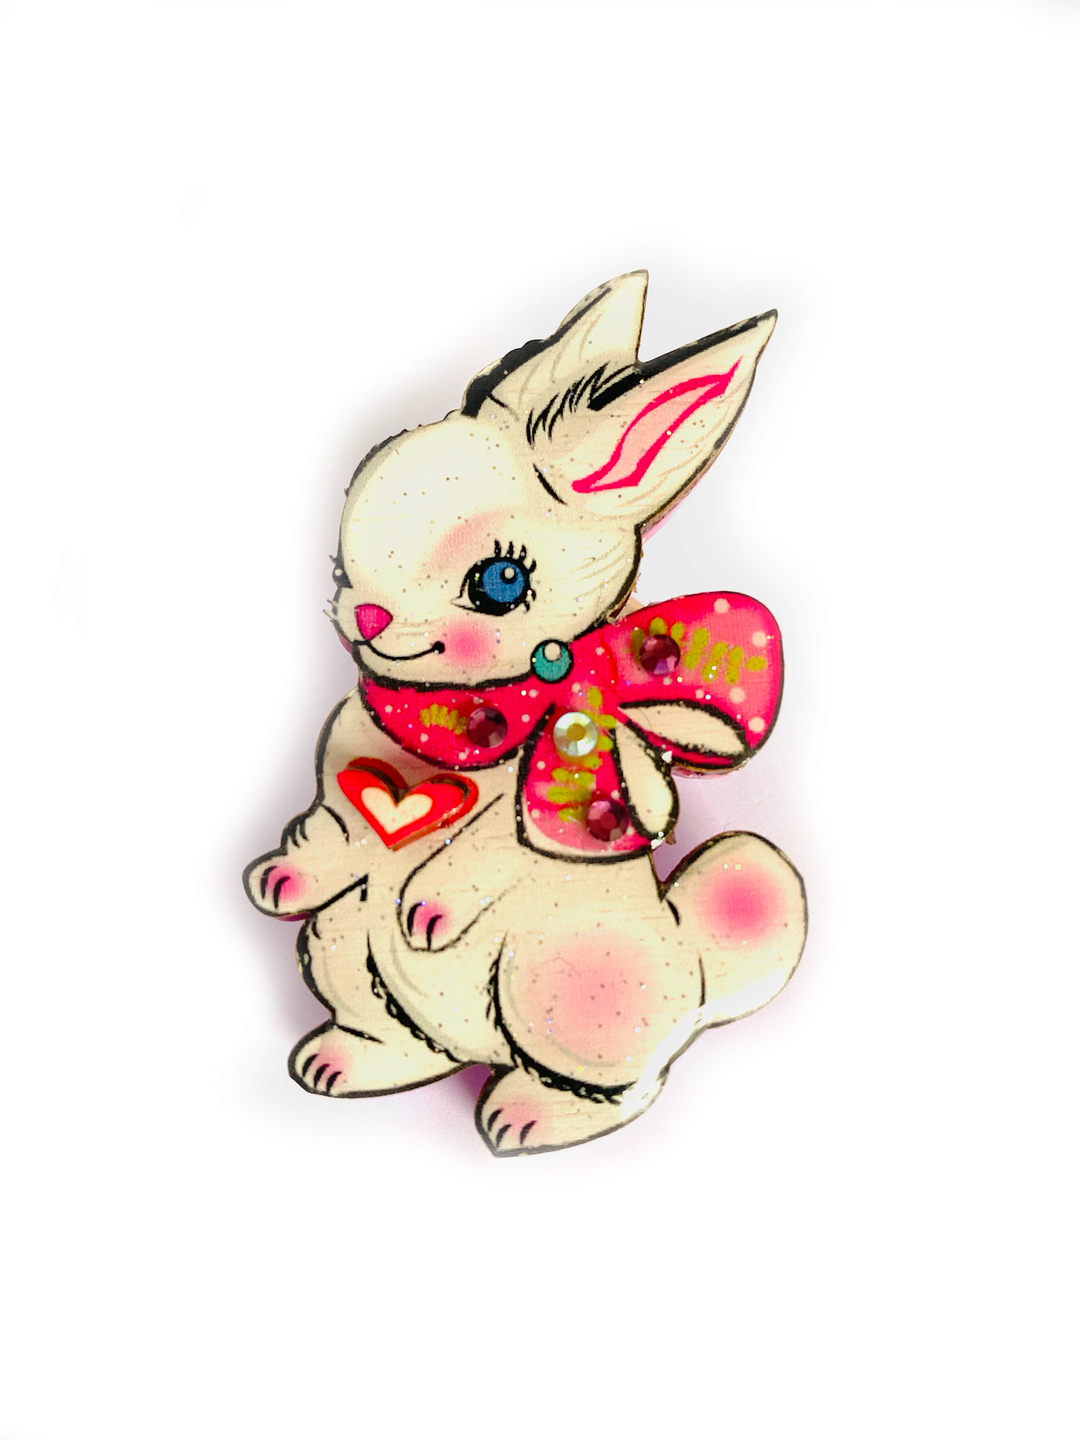 Layla the Bunny Brooch by Rosie Rose Parker